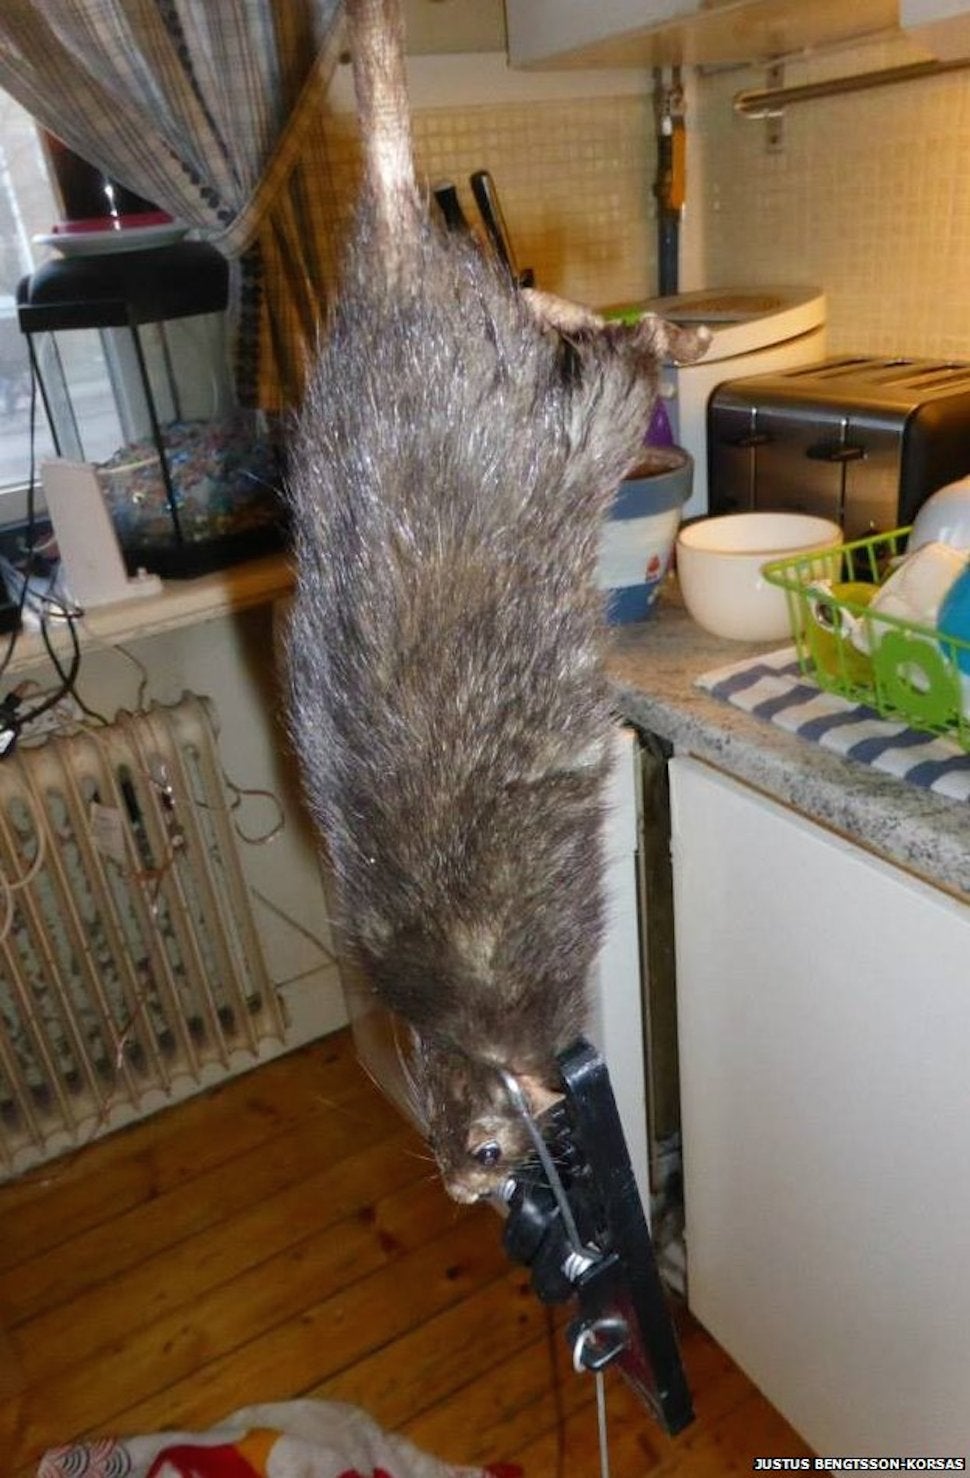 Ratzilla, the 16-Inch "Rat From Hell," Finally Captured in Sweden